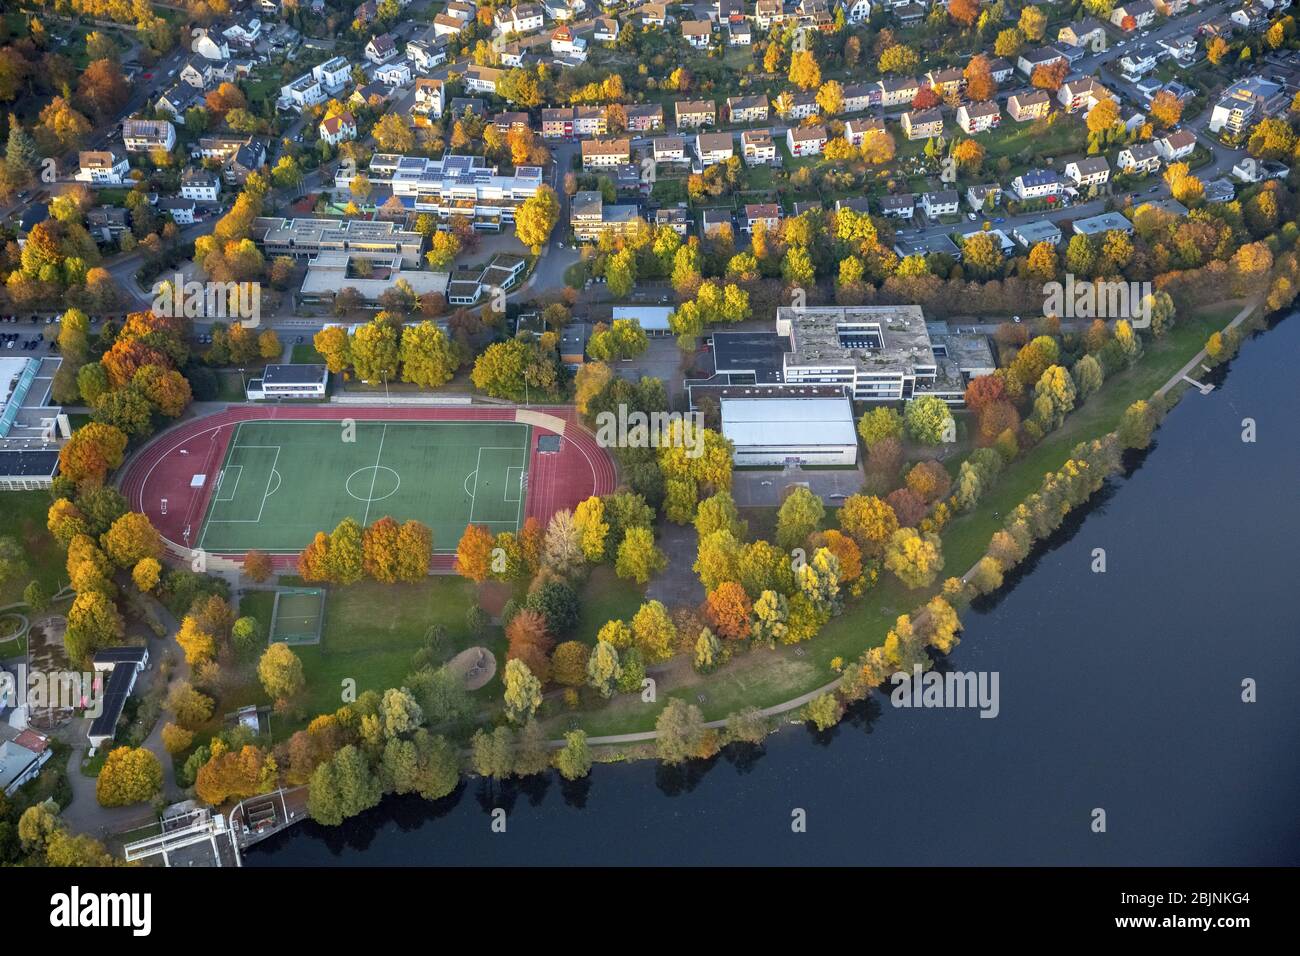 School building of the Friedrich Harkort Schule in Herdecke at river Ruhr and the sports complex of the TSG Fussball Herdecke 1911 e.V., 31.10.2016, aerial view, Germany, North Rhine-Westphalia, Ruhr Area, Herdecke Stock Photo